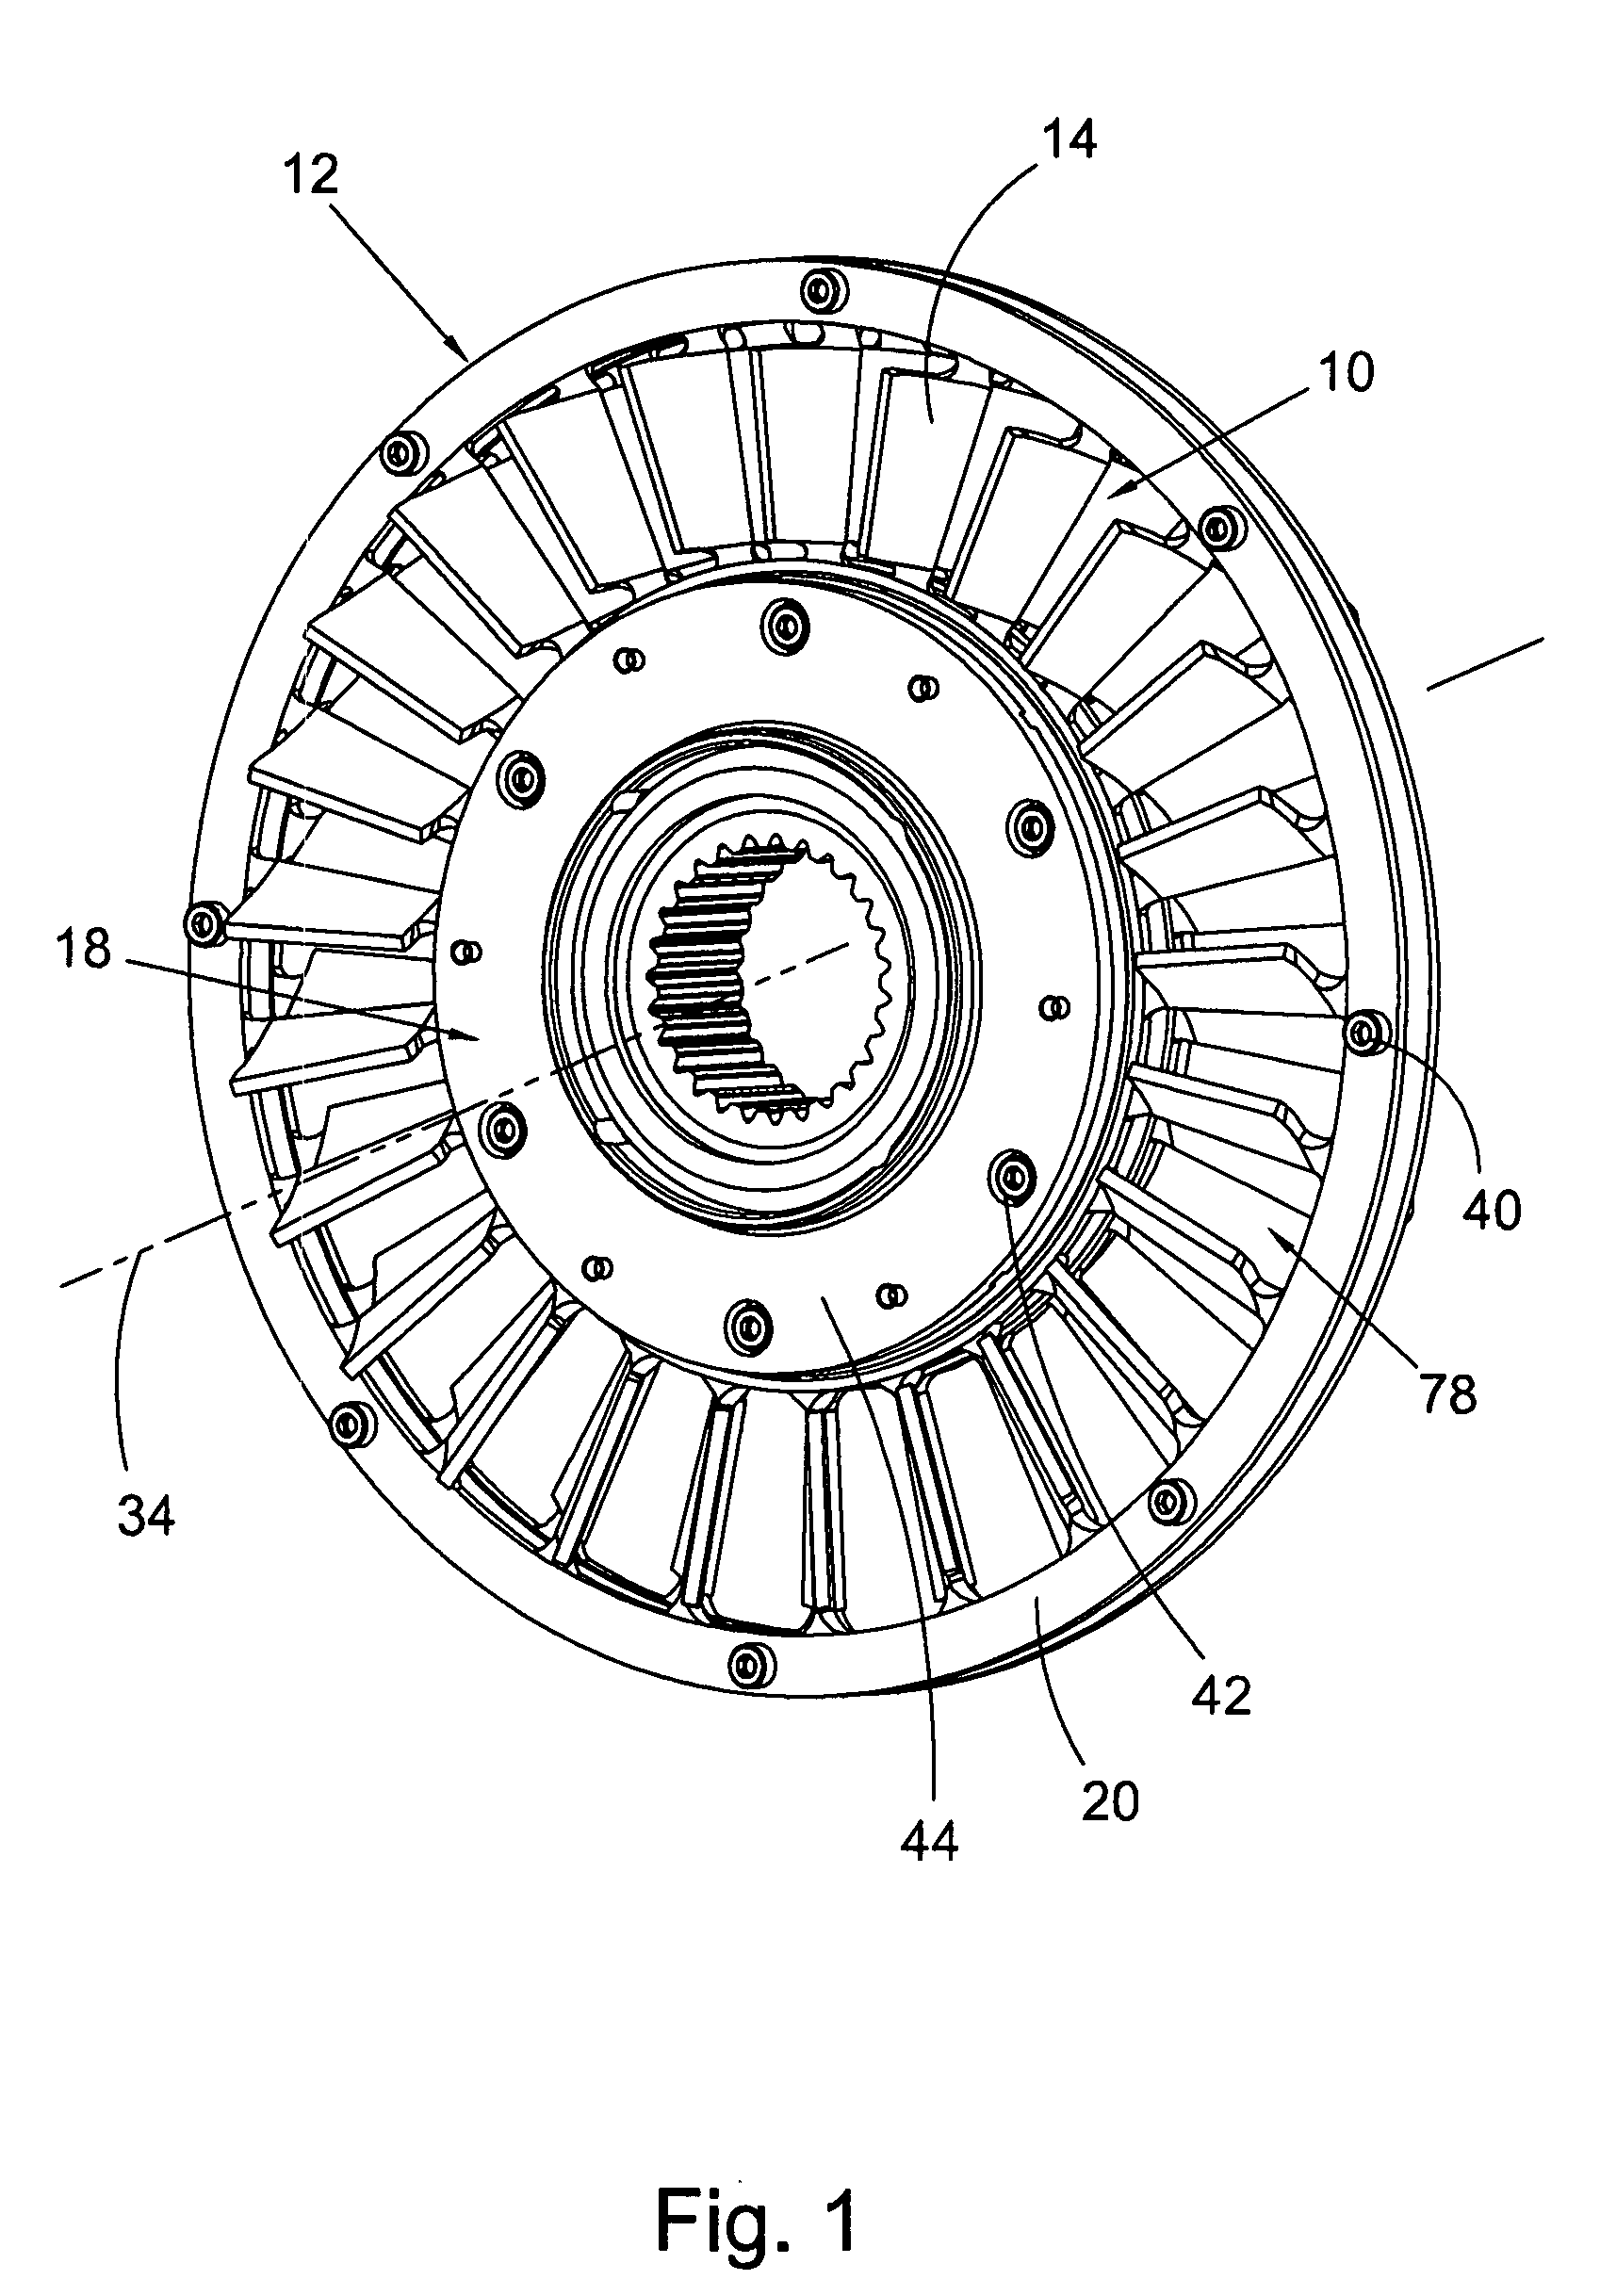 Two-part stator blade